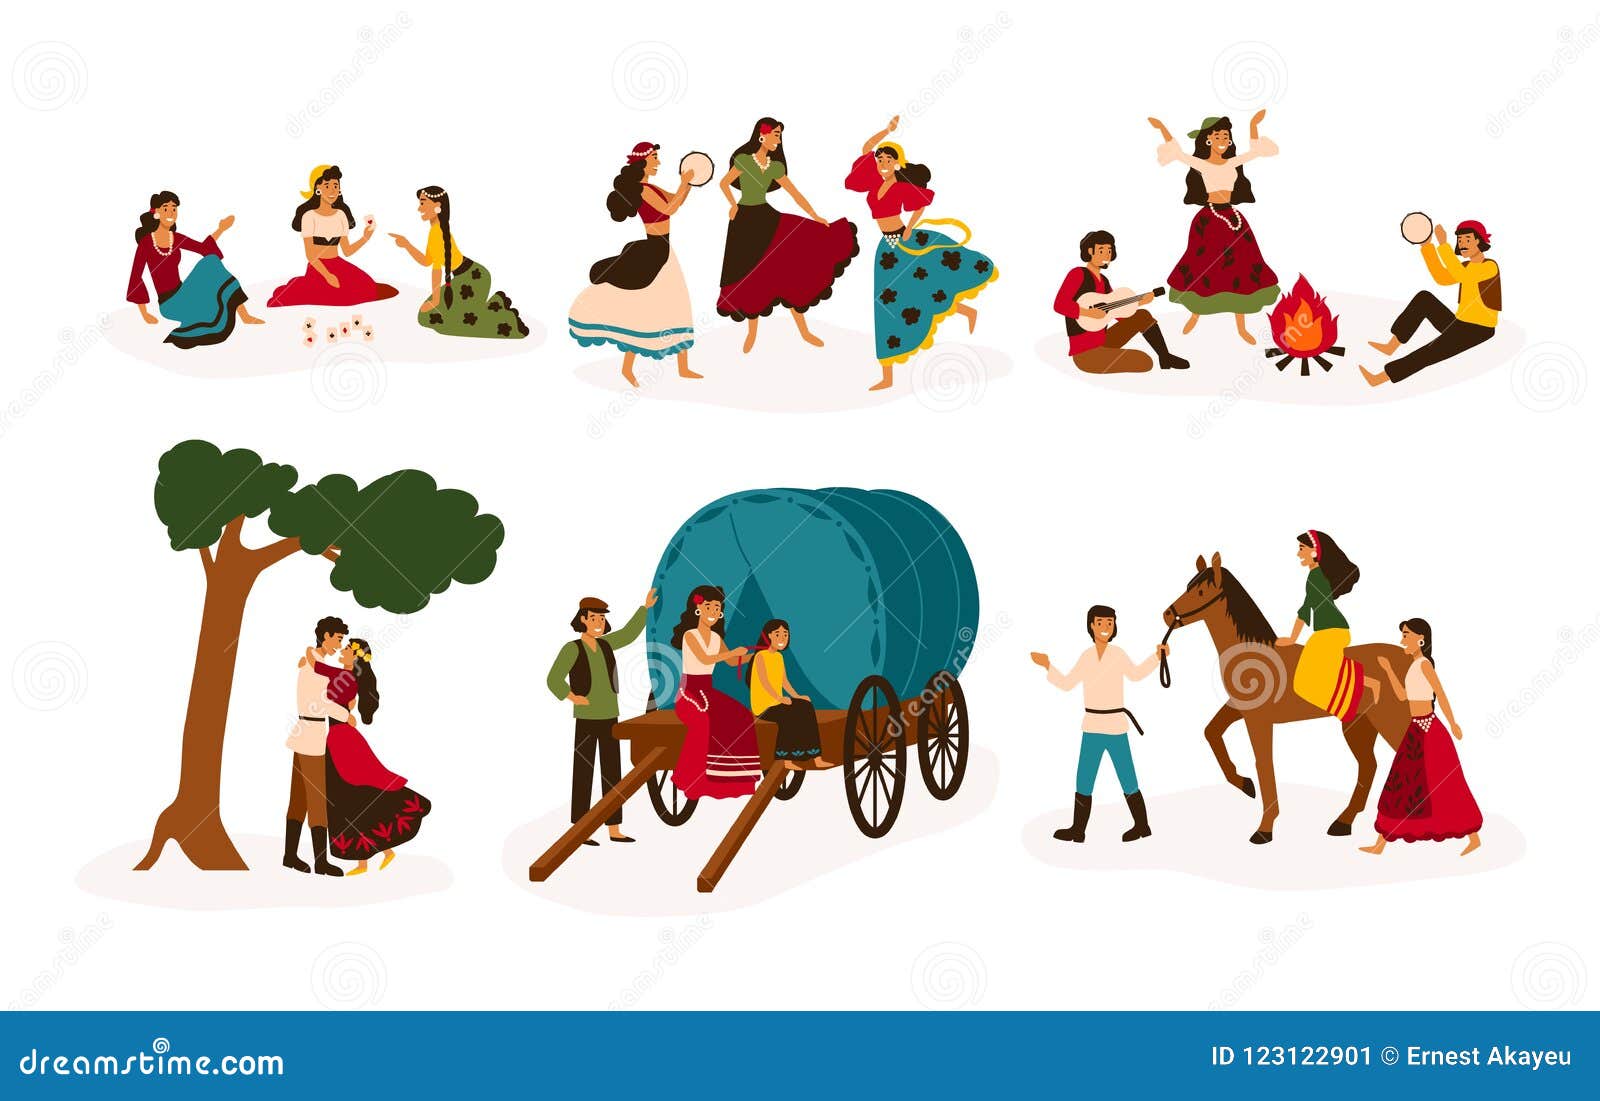 set of lifestyle scenes with gypsies or romani people performing various activities - riding horse, playing guitar and